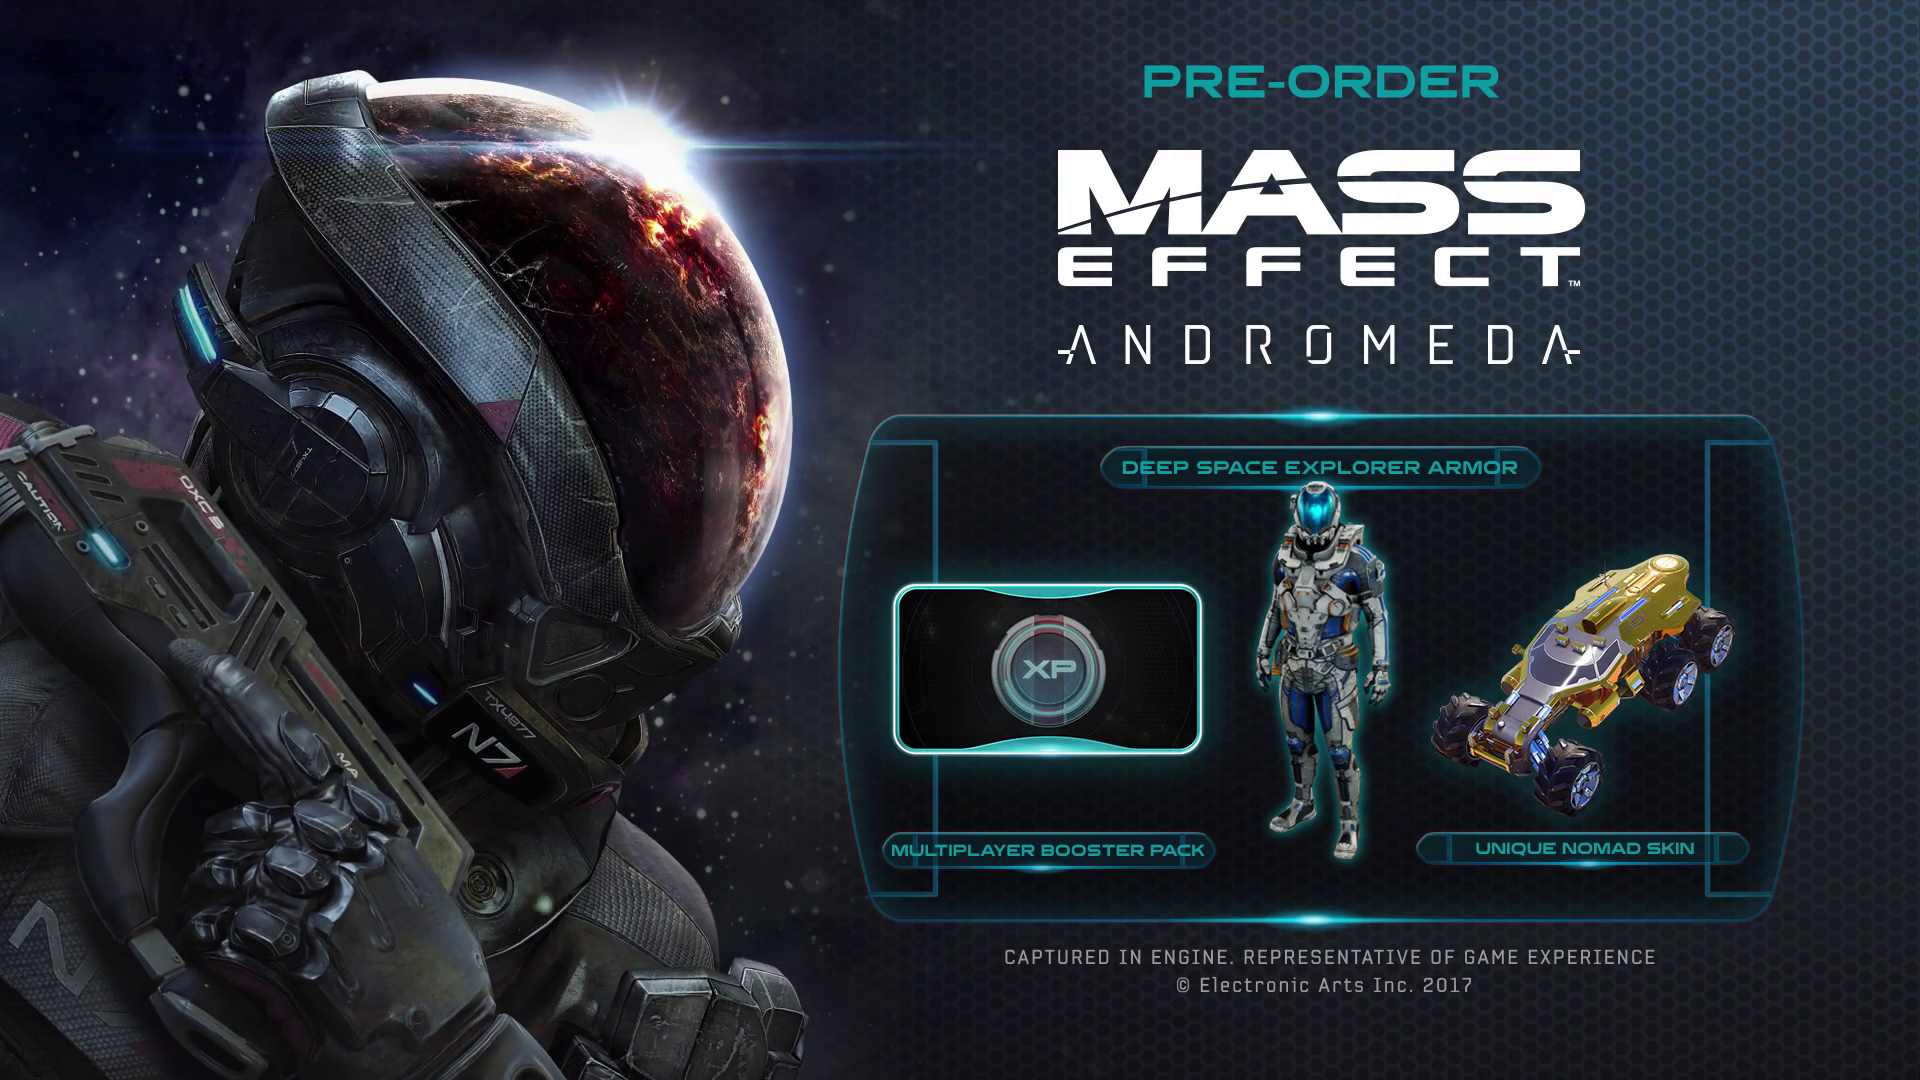 mass effect andromeda deluxe edition release date